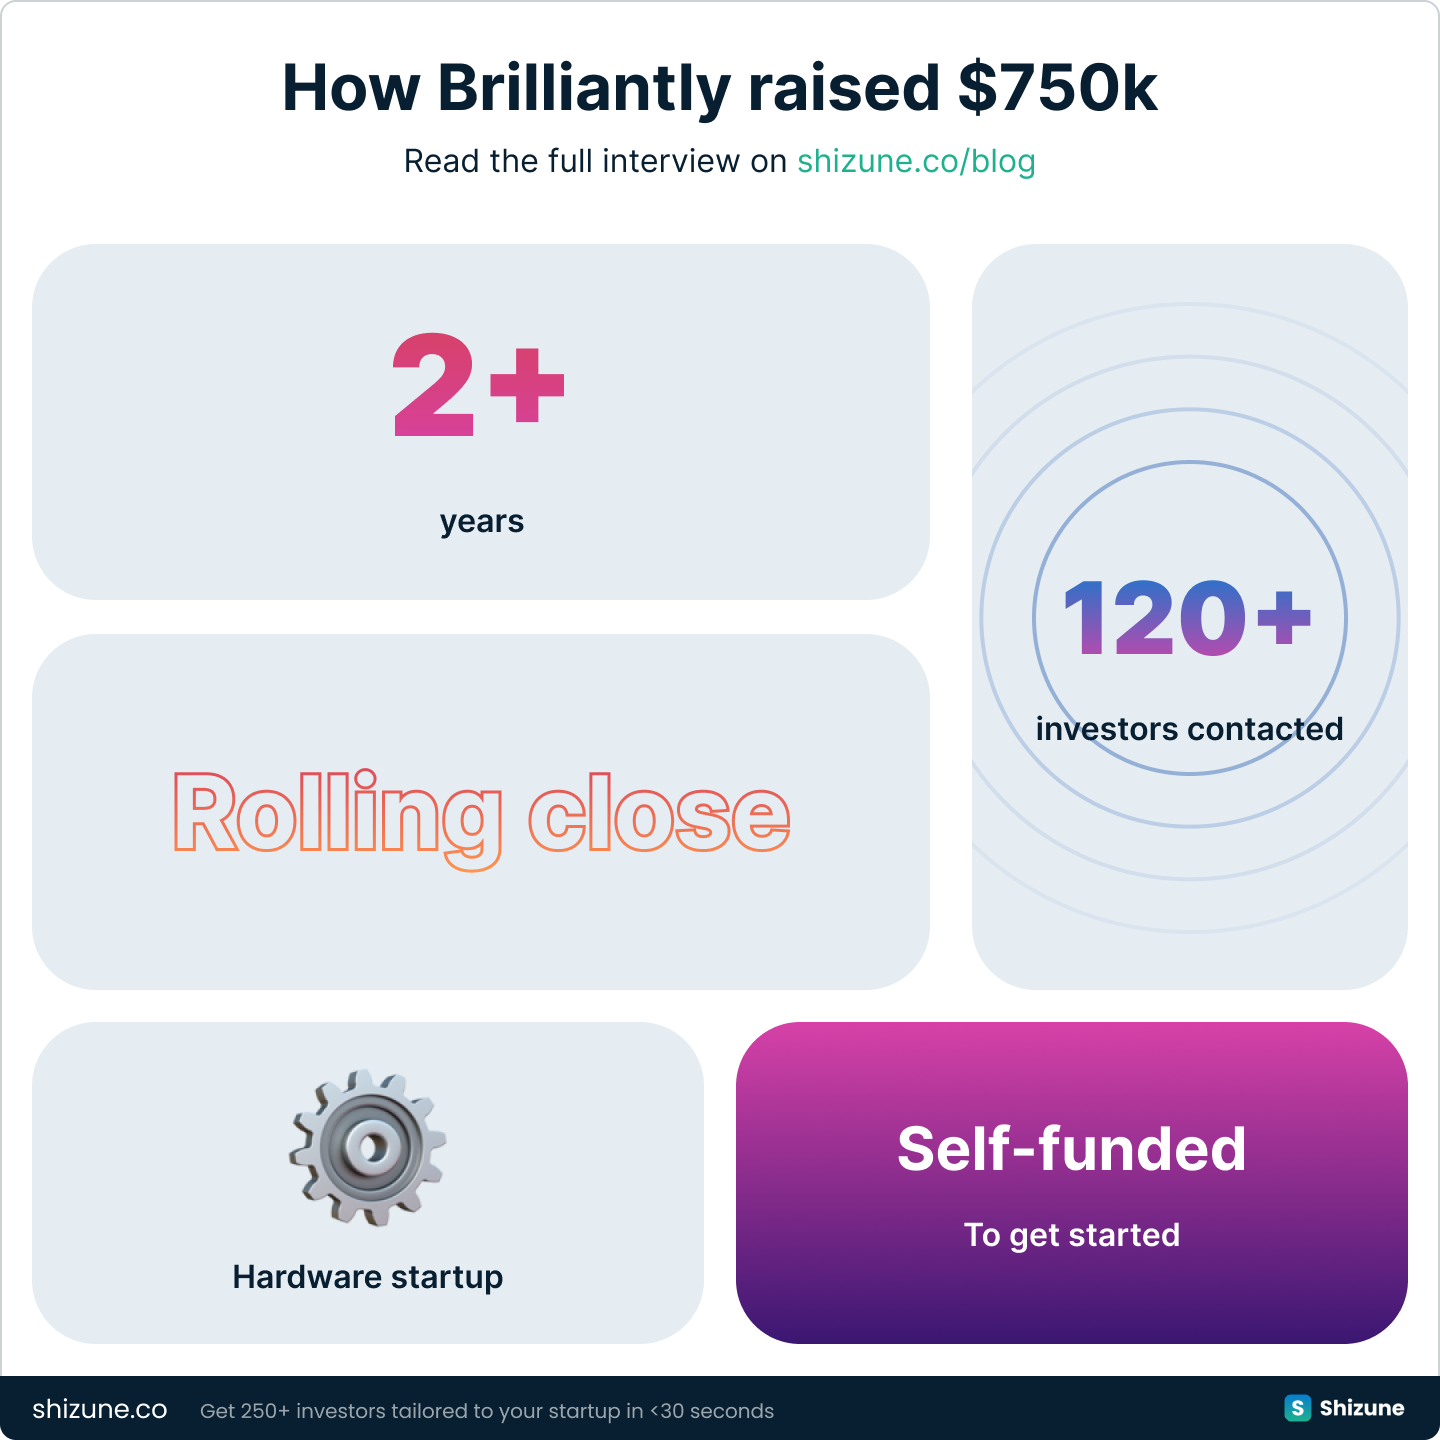 How Brilliantly raised a $750k pre-seed round